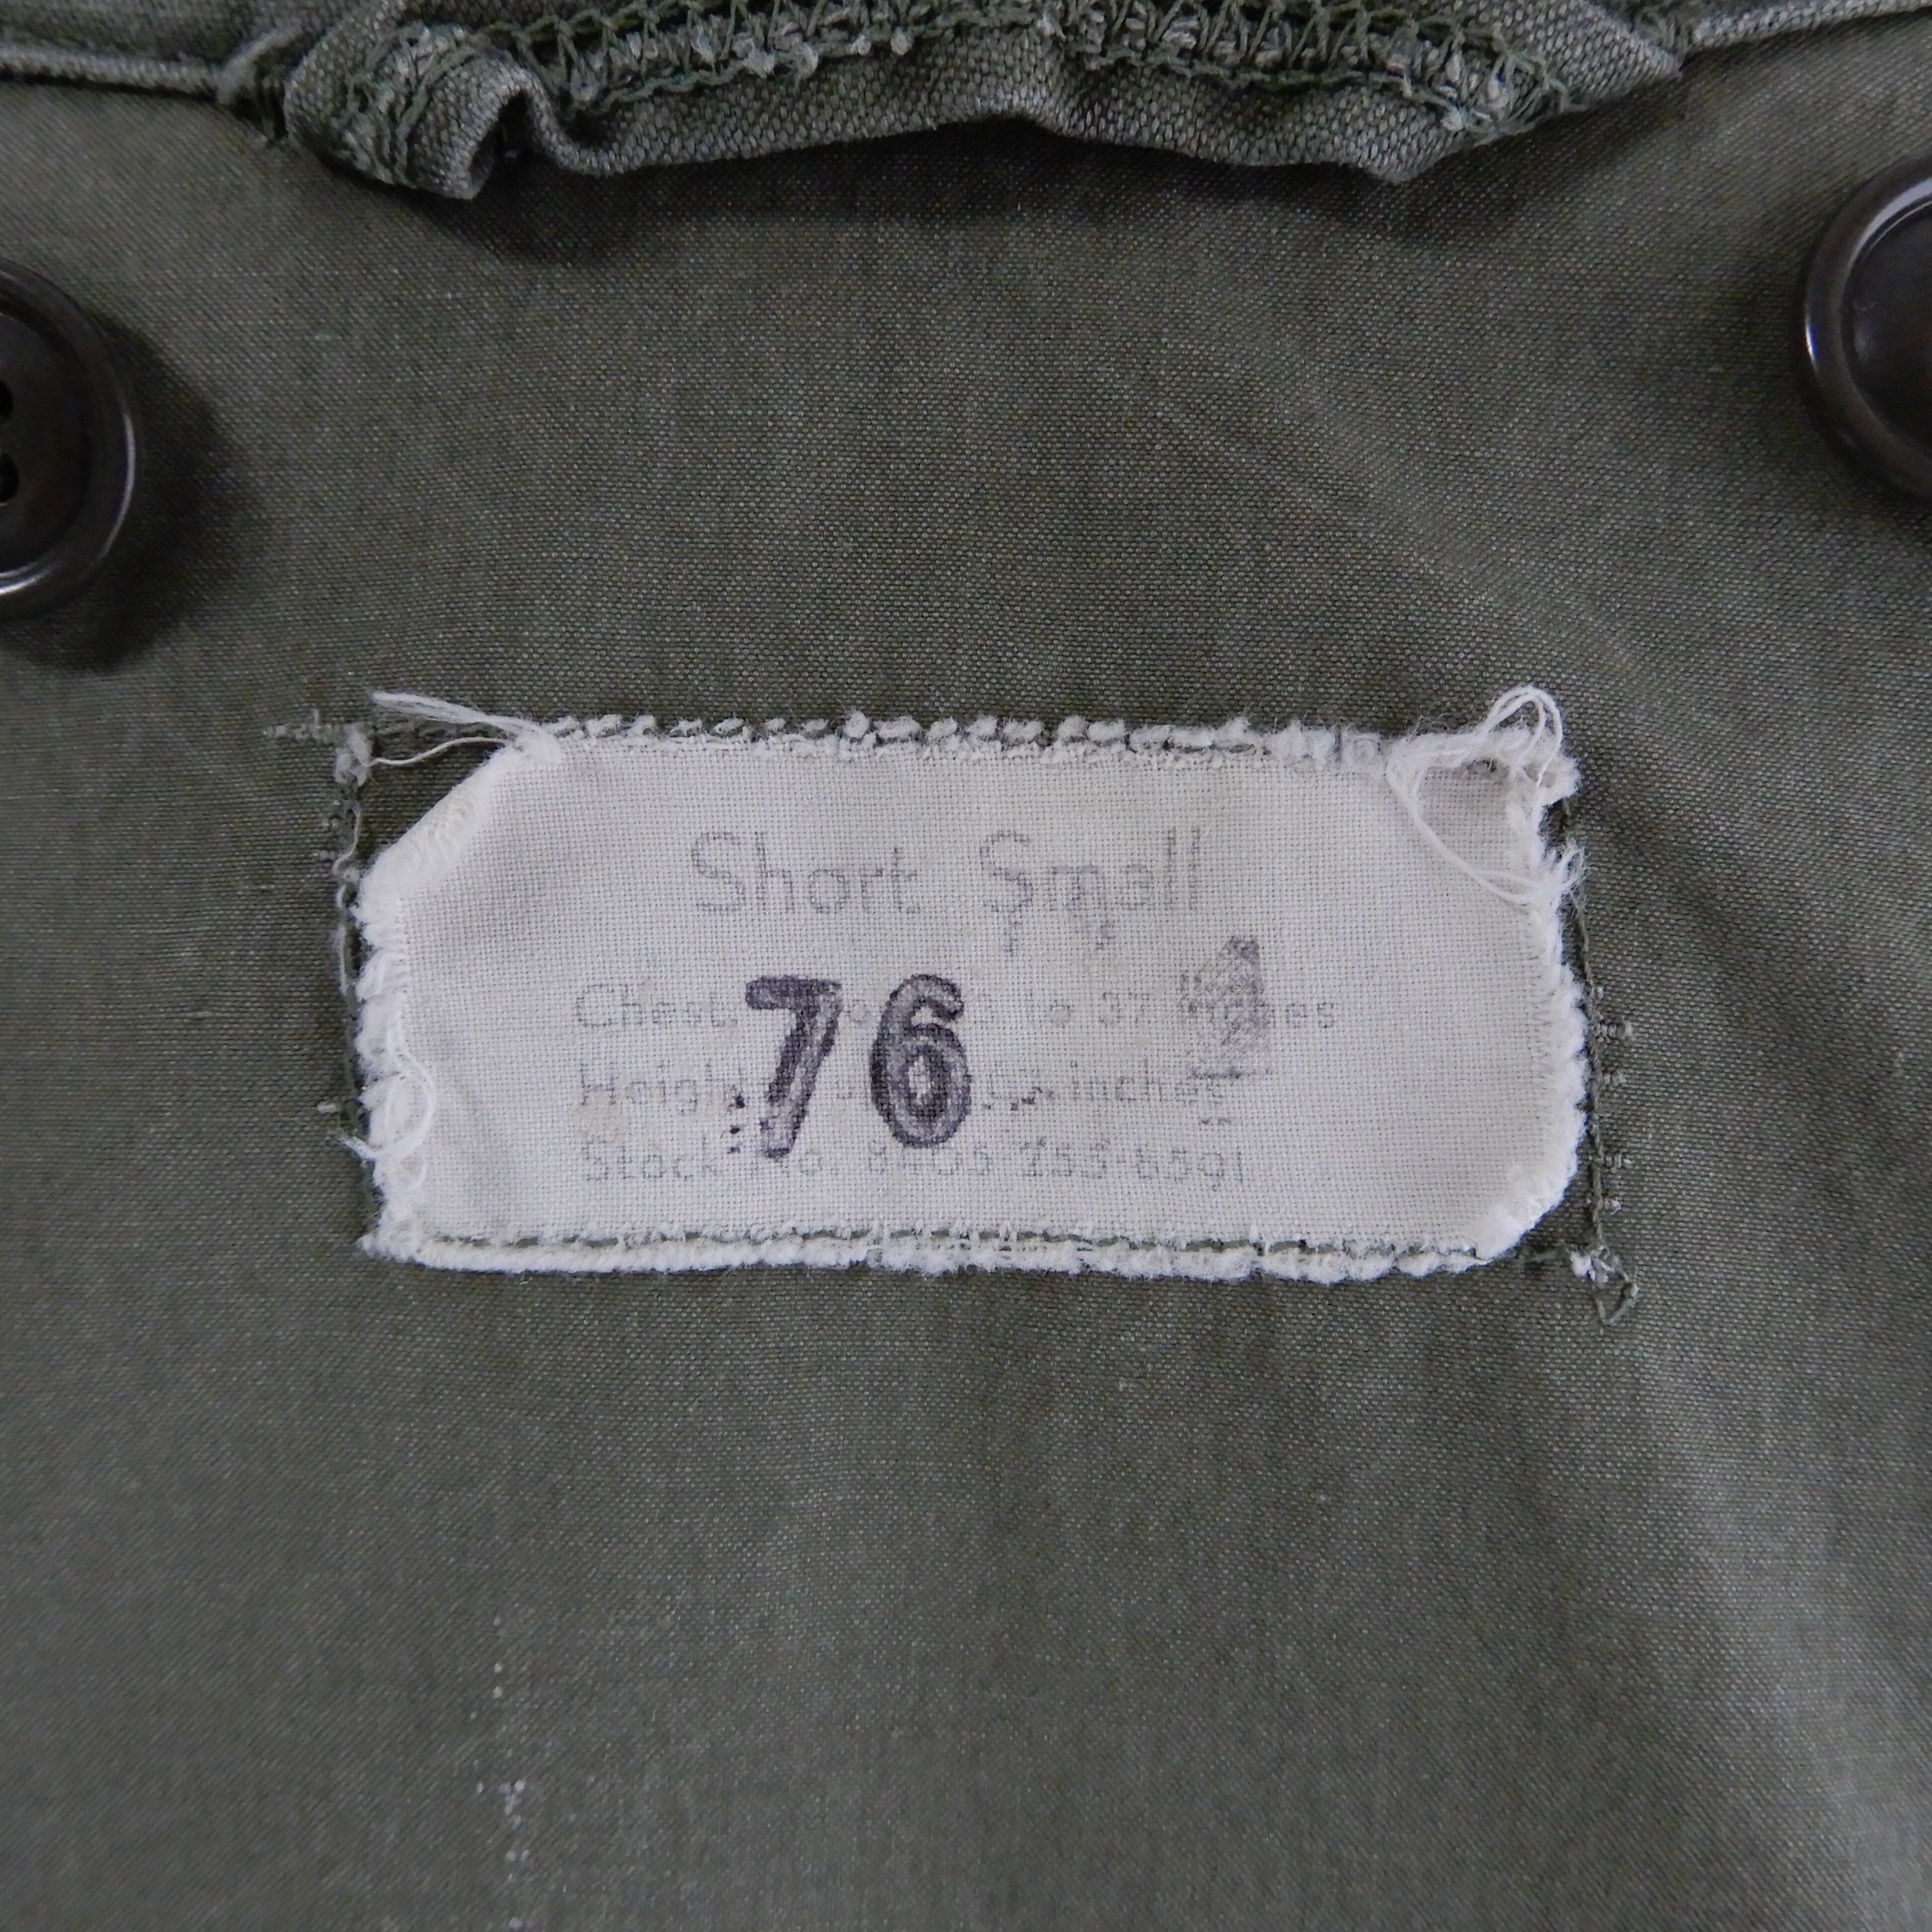 US ARMY M-51 Jacket 1961s Short Small